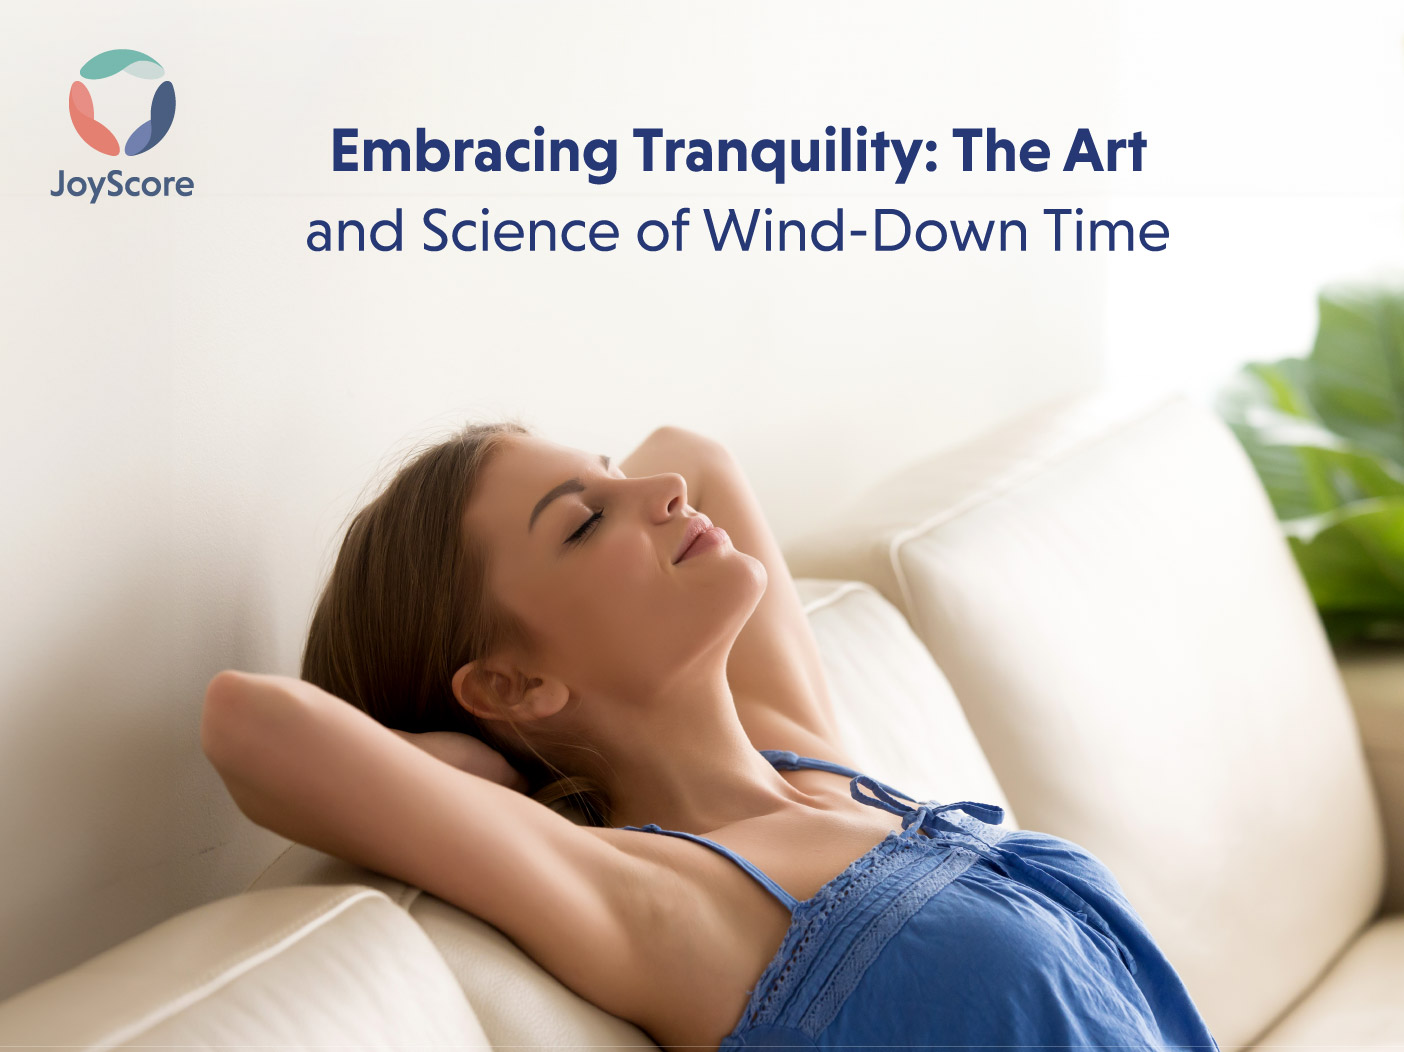 Embracing Tranquility: The Art and Science of Wind-Down Time